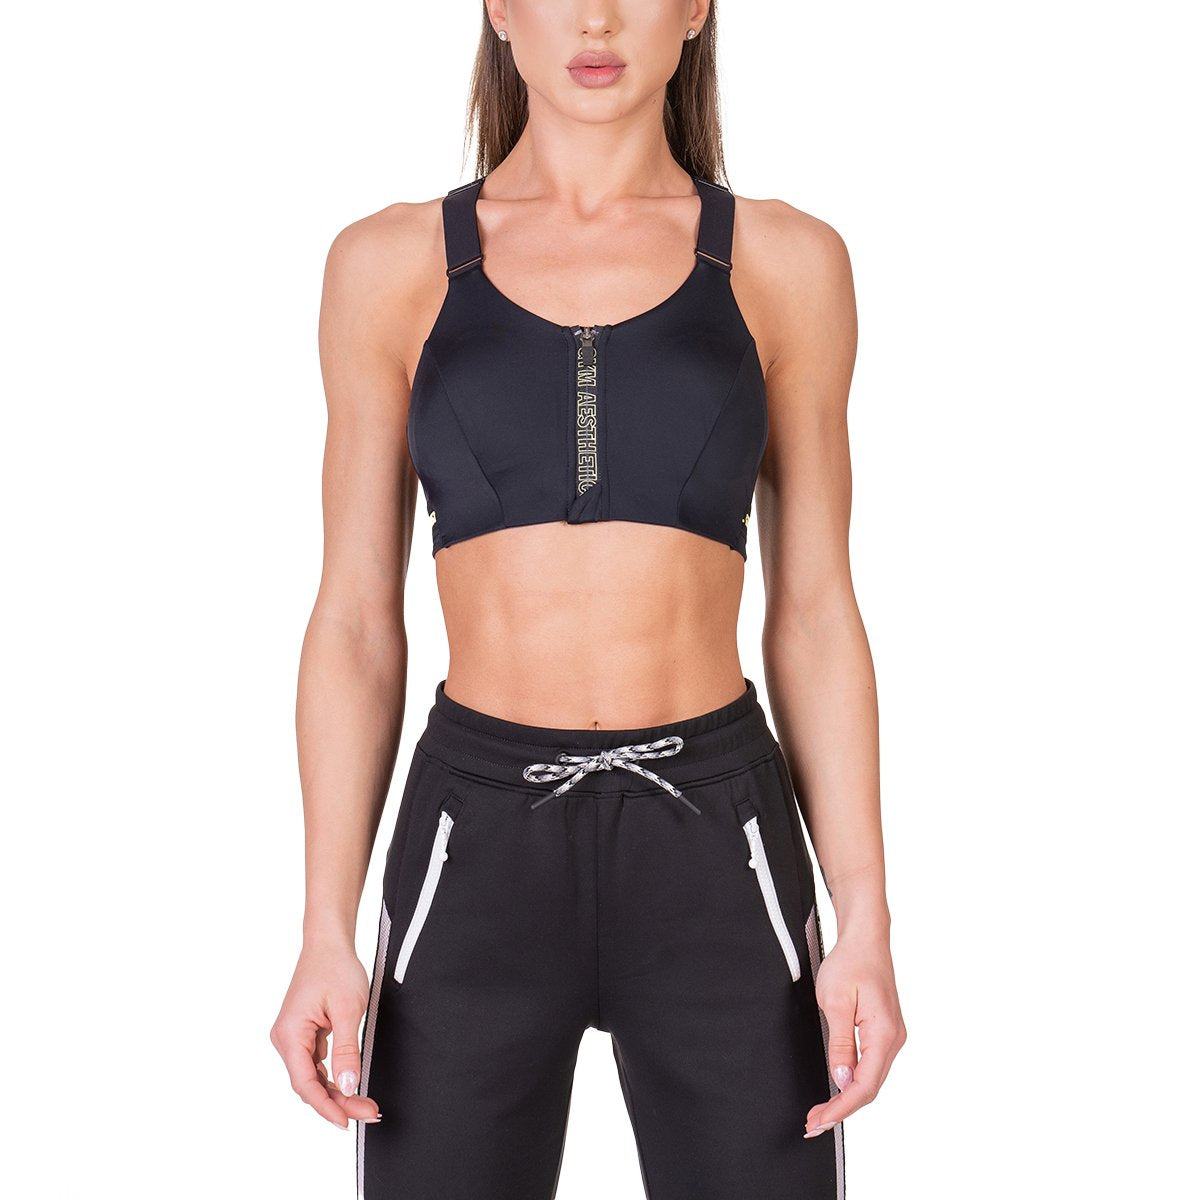 Get the Best Quality Zip Sports Bra from China's Leading Supplier - Westfox!